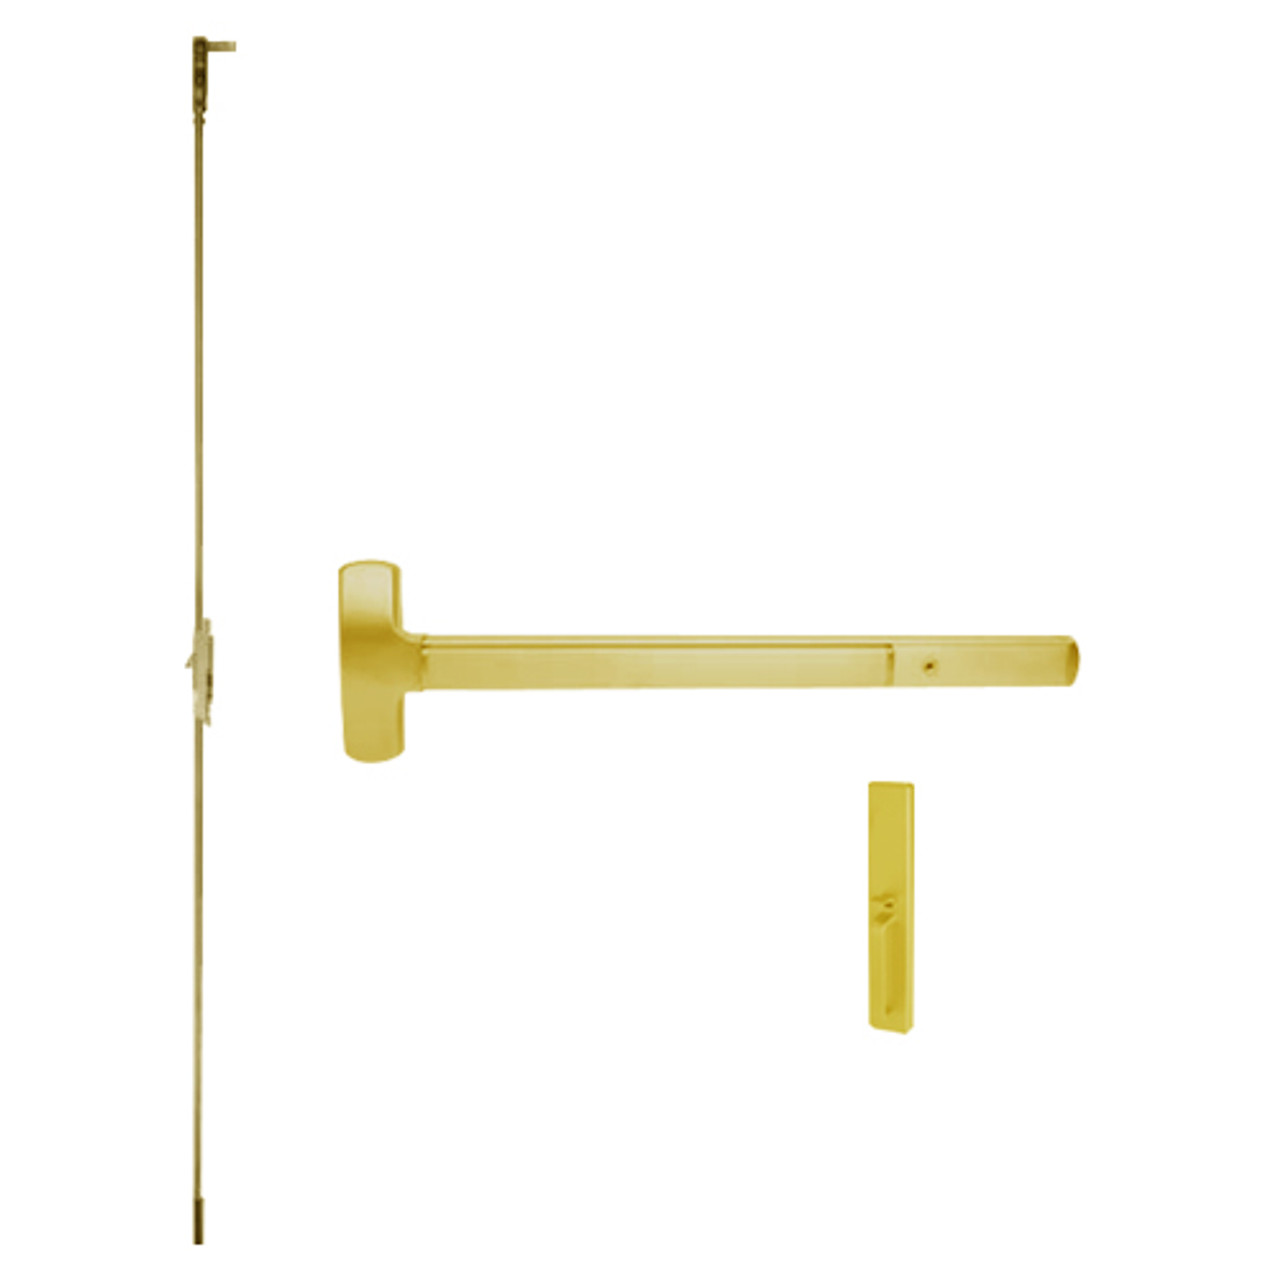 25-C-TP-BE-US4-3 Falcon Exit Device in Satin Brass